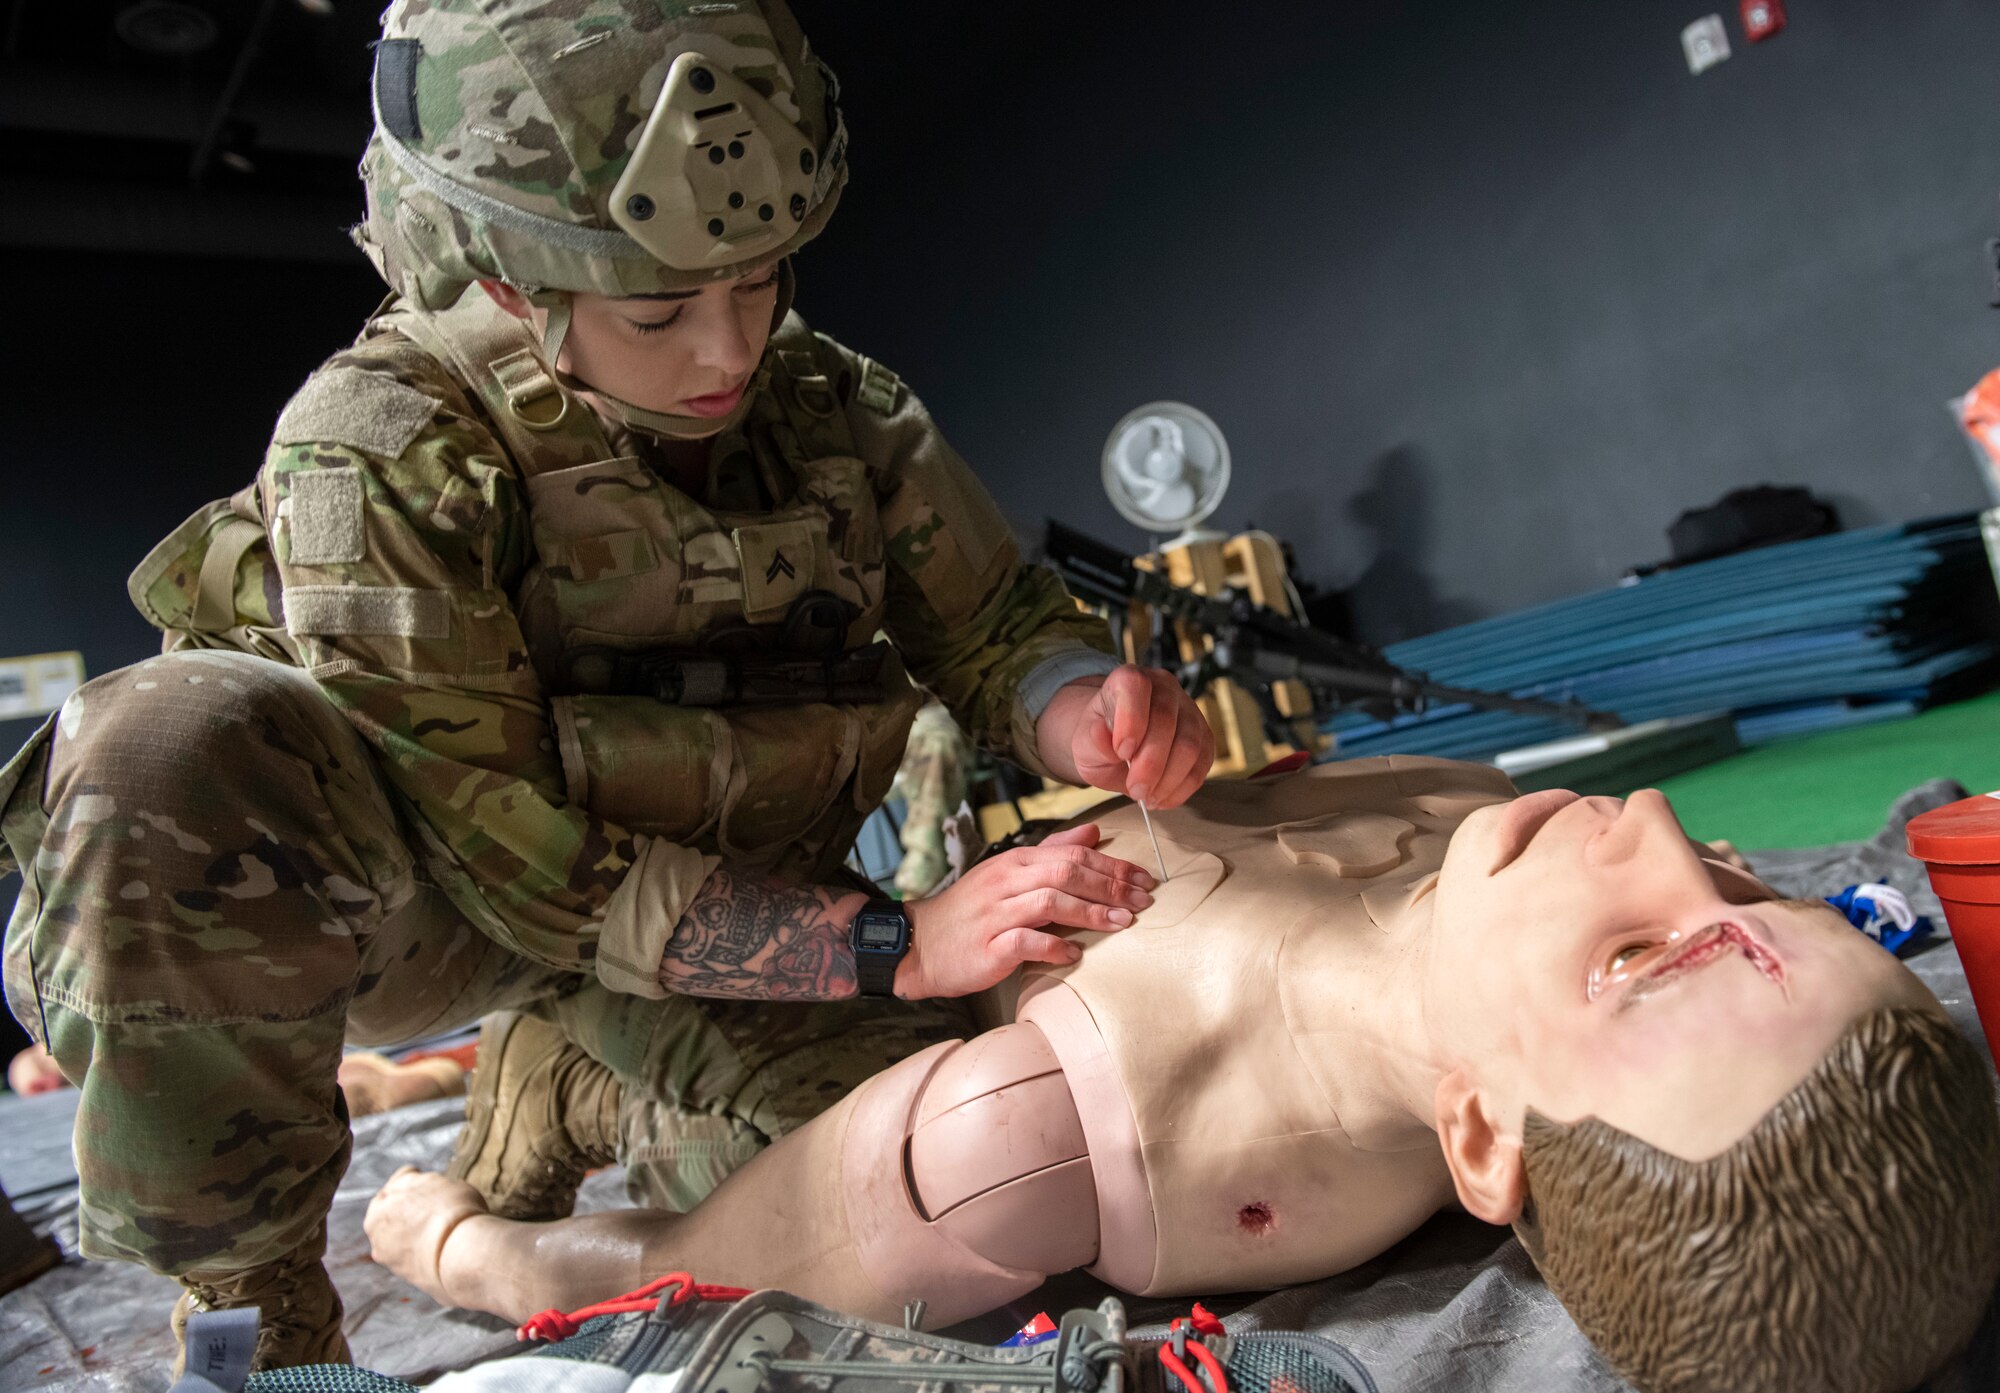 Army Cpl. Katelynne Pace, a combat medic specialist assigned to Headquarters and Headquarters Company, 1st Battalion, 501st Parachute Infantry Regiment, 4th Infantry Brigade Combat Team (Airborne), 25th Infantry Regiment, U.S. Army Alaska, performs a needle decompression on a simulated combat casualty during annual recertification at Joint Base Elmendorf-Richardson, Alaska, Sept. 17, 2019. The medics utilized the Tactical Combat Casualty Care Exportable (TC3X) kit to maintain their skills and proficiency. The TC3X is a state of the art mannequin that mimics various traumatic scenarios, simulates human pulmonary and respiratory functions/distress, and augments realistic training by screaming, breathing, bleeding, moving, physiologically responding to treatments rendered and providing feedback data via recording sensors. Pace is a native of Brevard, N.C. (U.S. Air Force photo by Alejandro Peña)